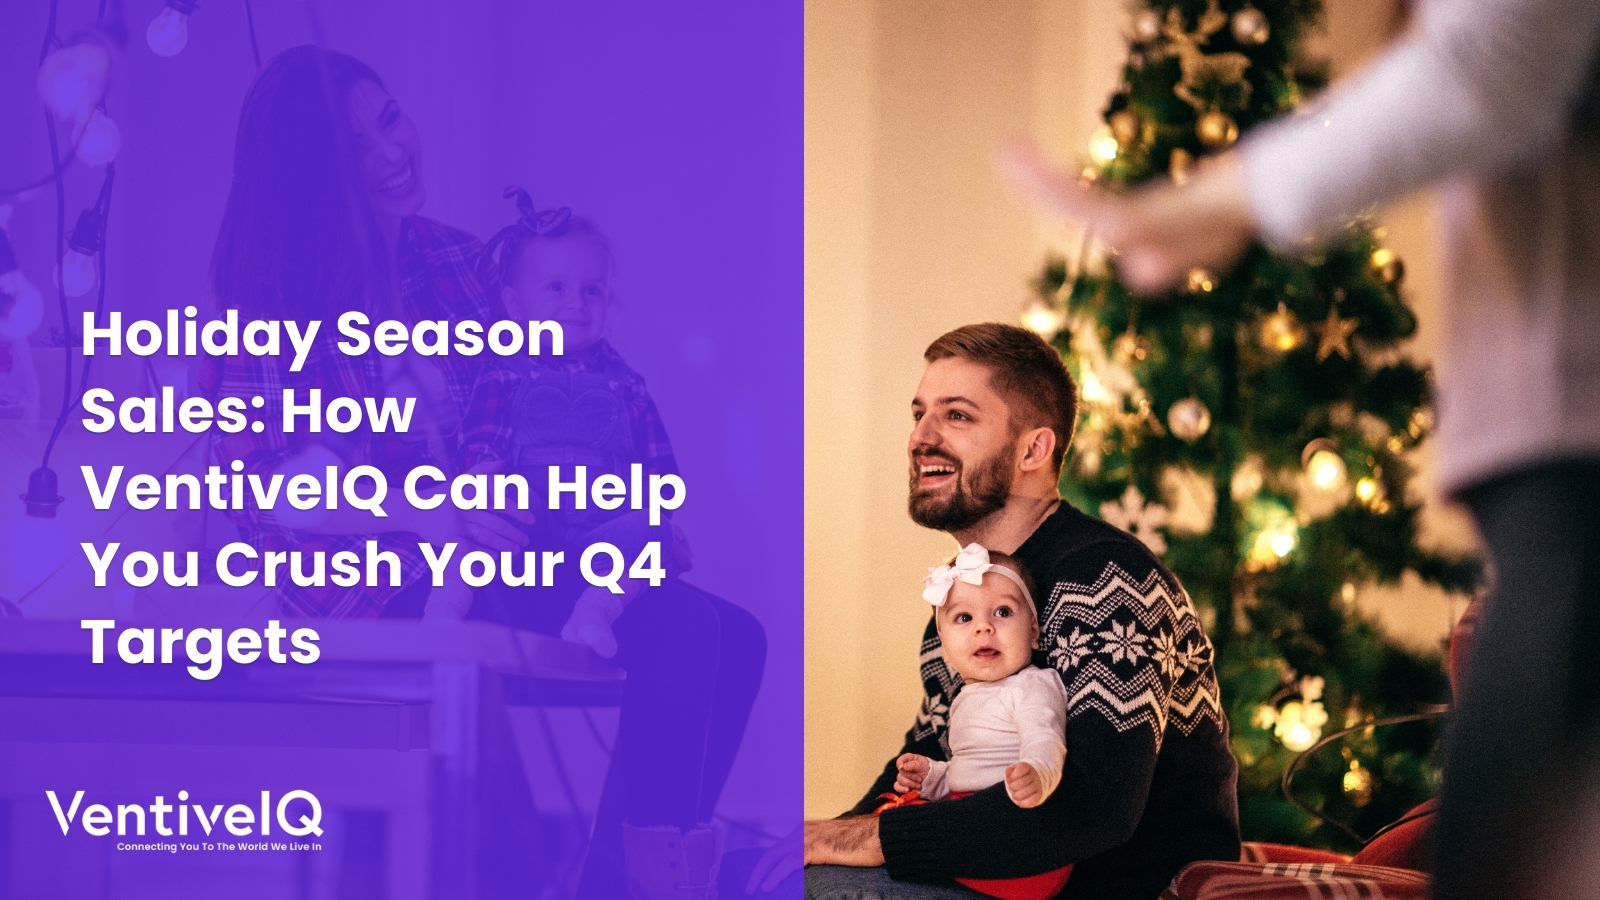 Holiday Season Sales: How VentiveIQ Can Help You Crush Your Q4 Targets